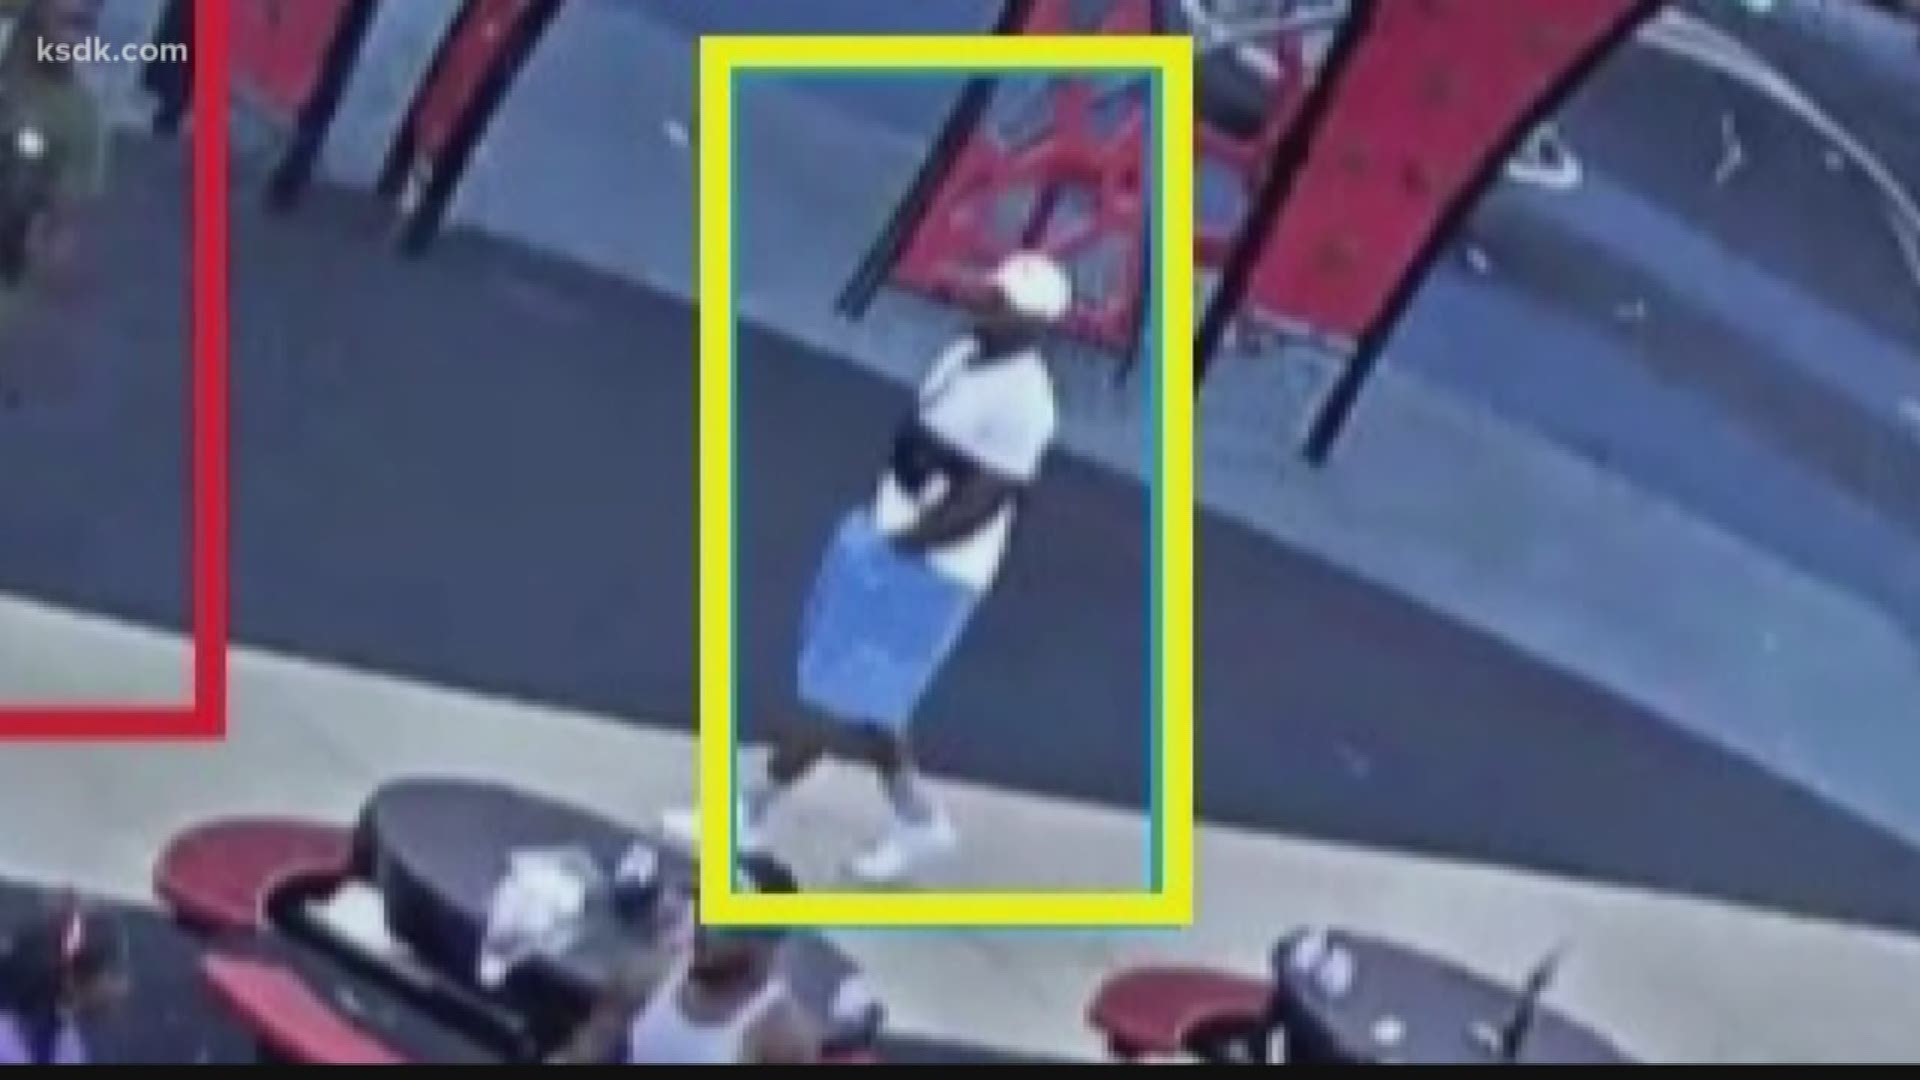 In the park's surveillance video, you could see people running, taking cover, as shots were fired. Even a little girl is carrying a baby to protect her.